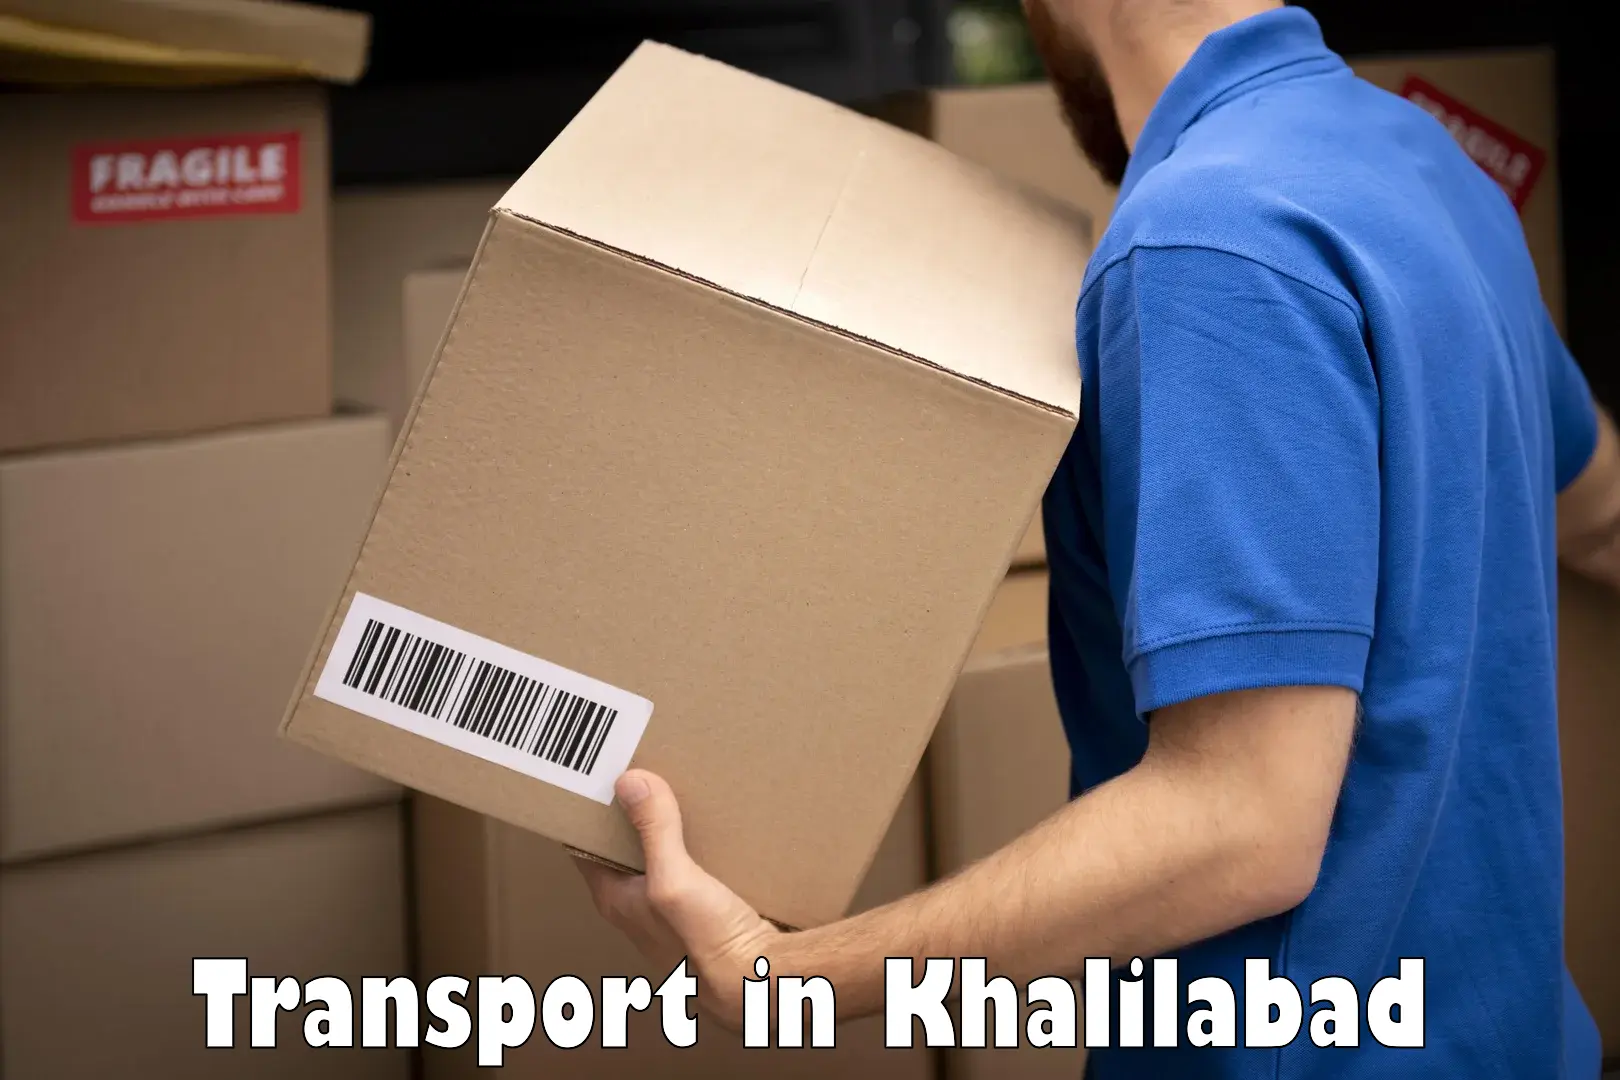 Daily transport service in Khalilabad